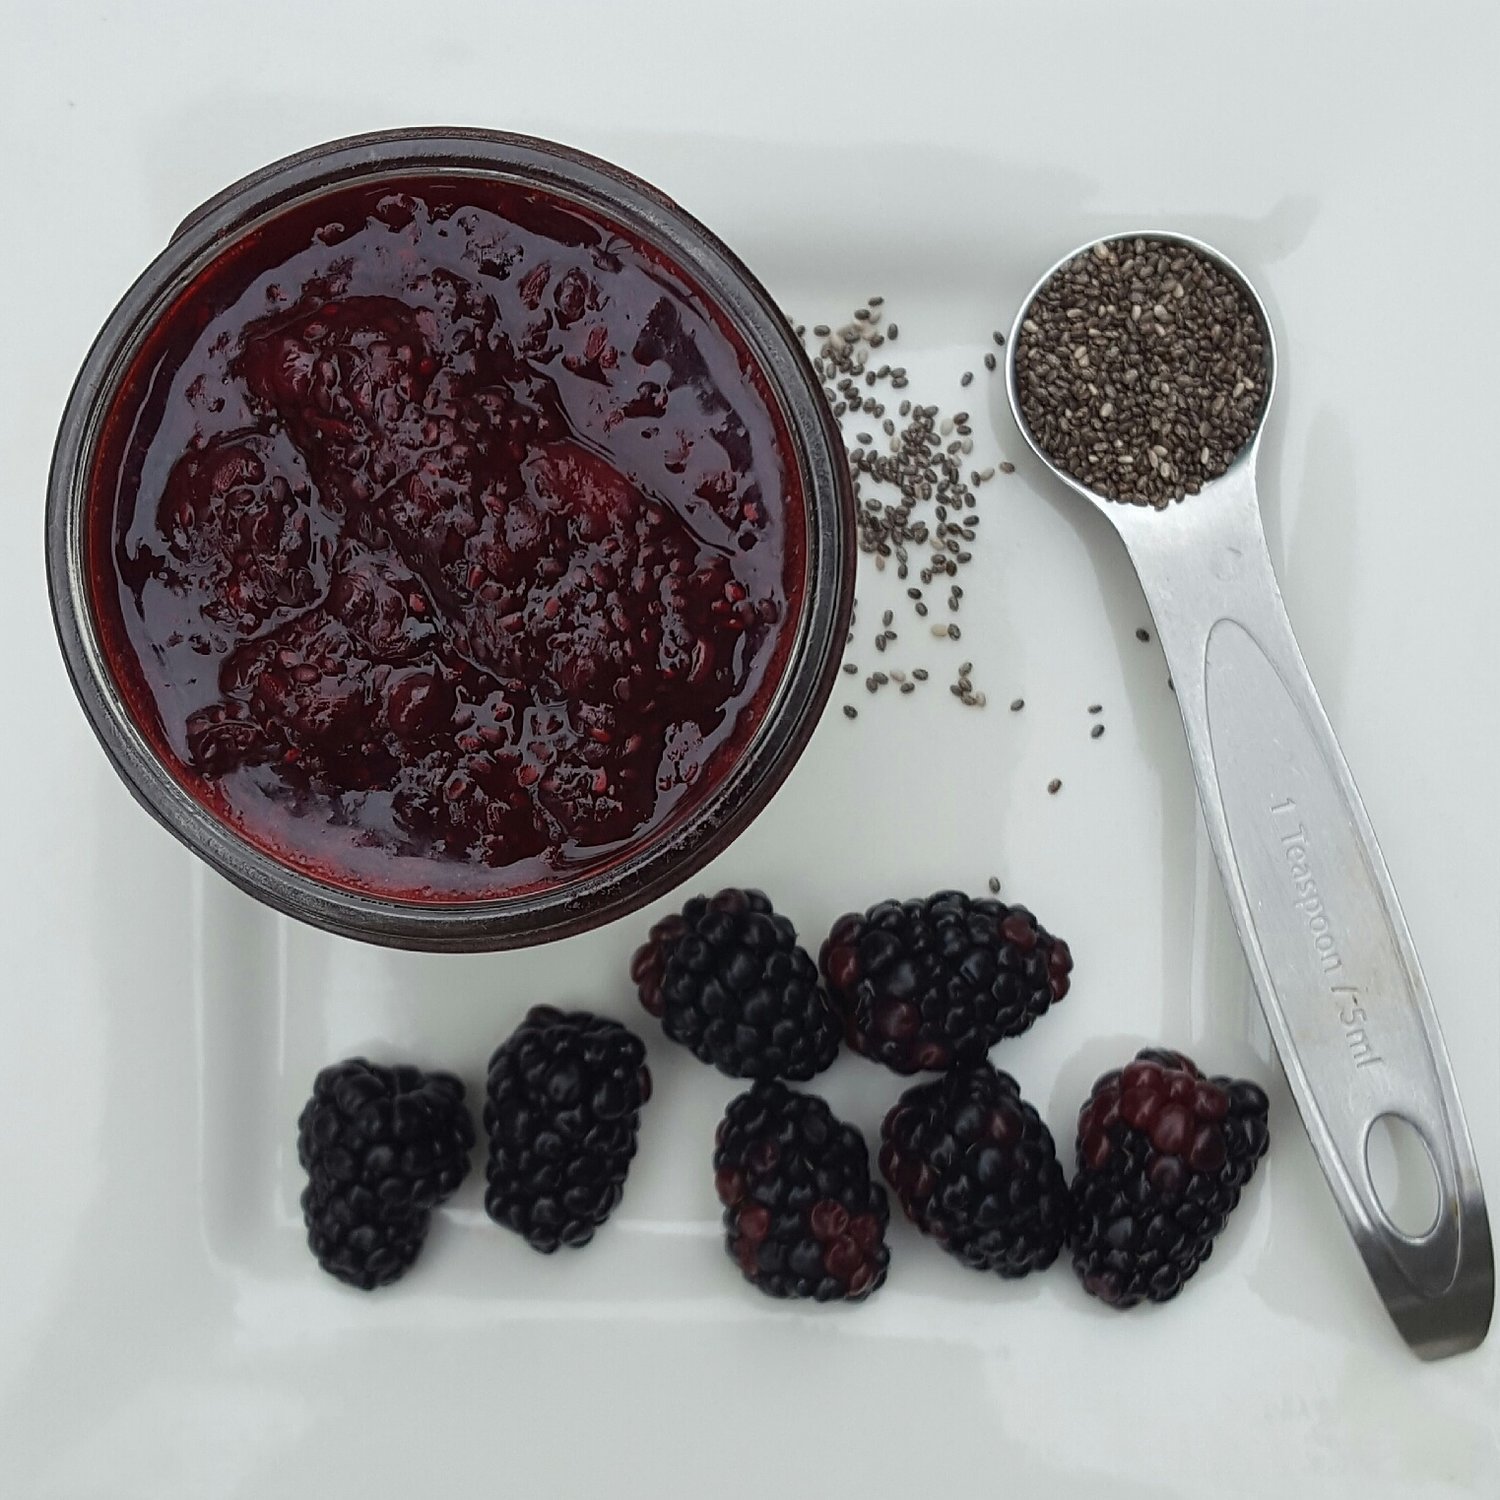 Voilá. Easy chia jam with any fruit. No need to buy store bought jam anymore!